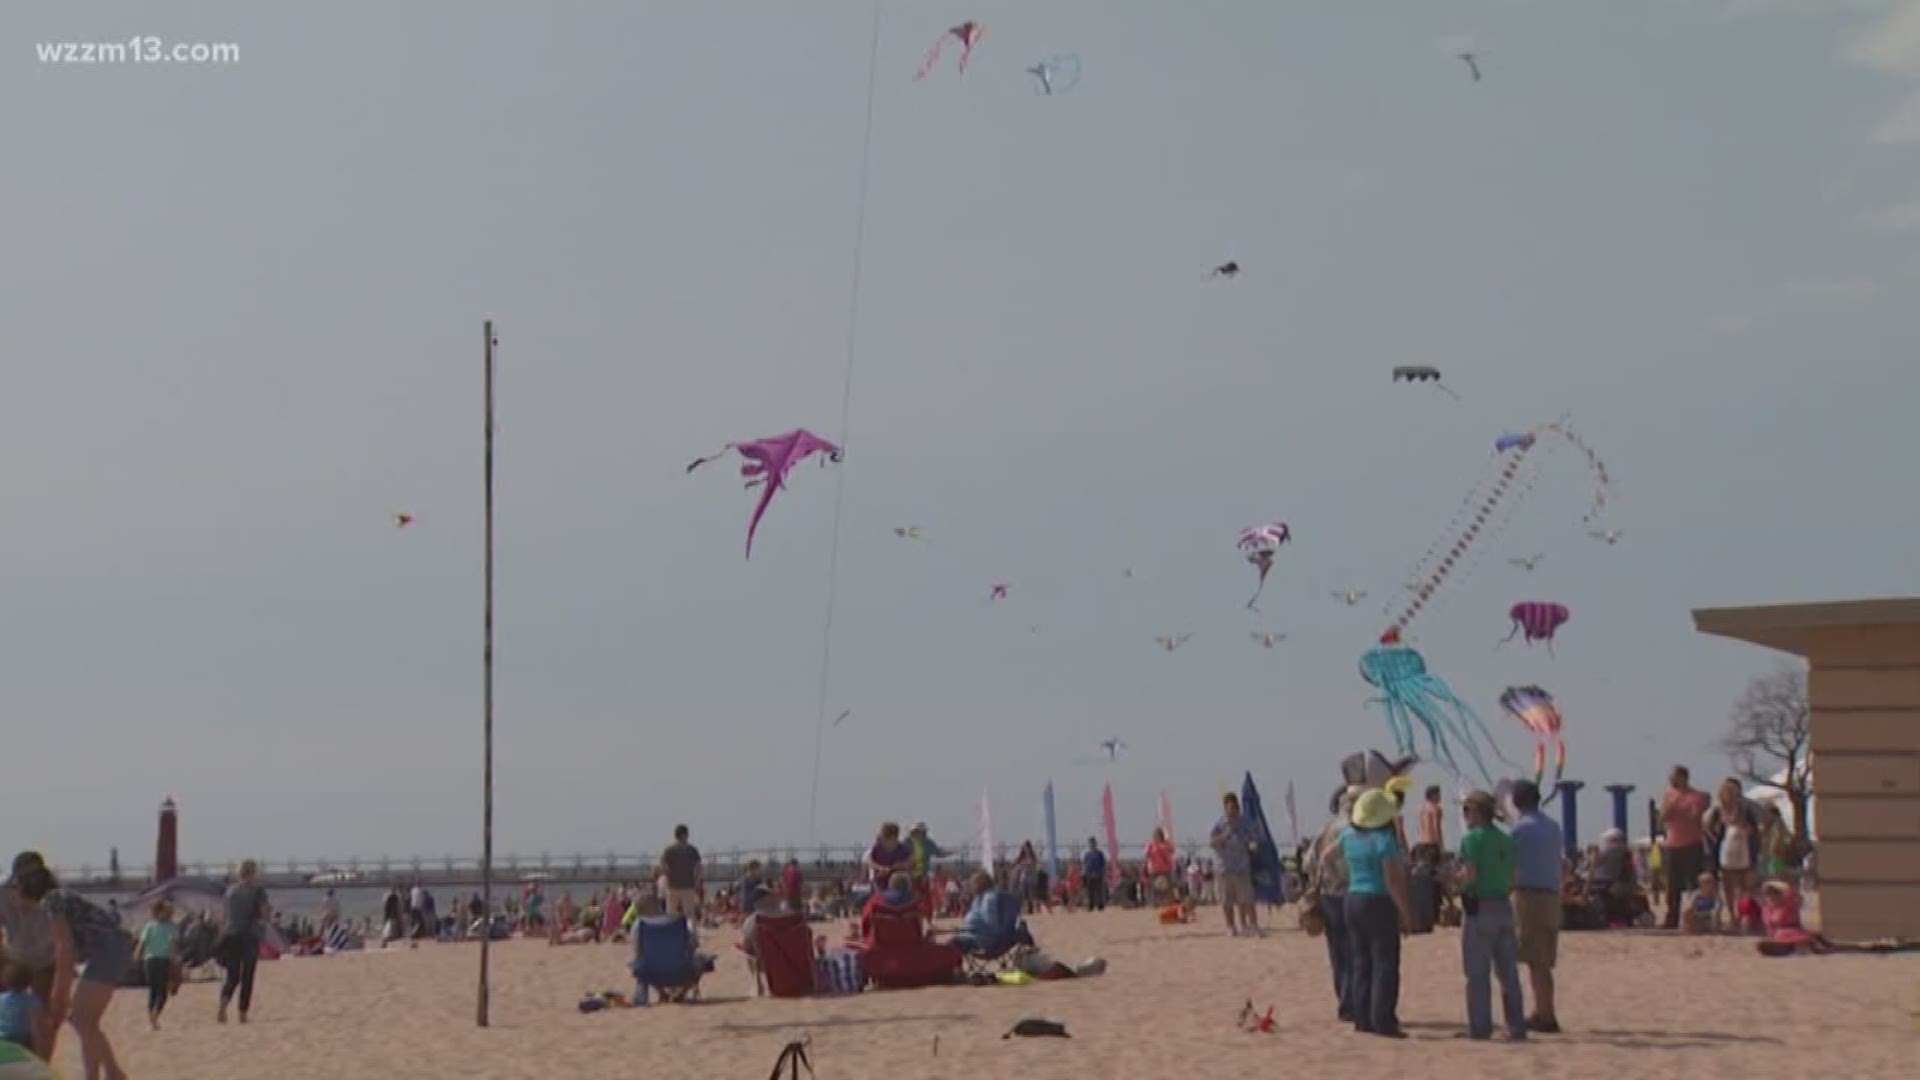 Great Lakes Kite Festival ending this year